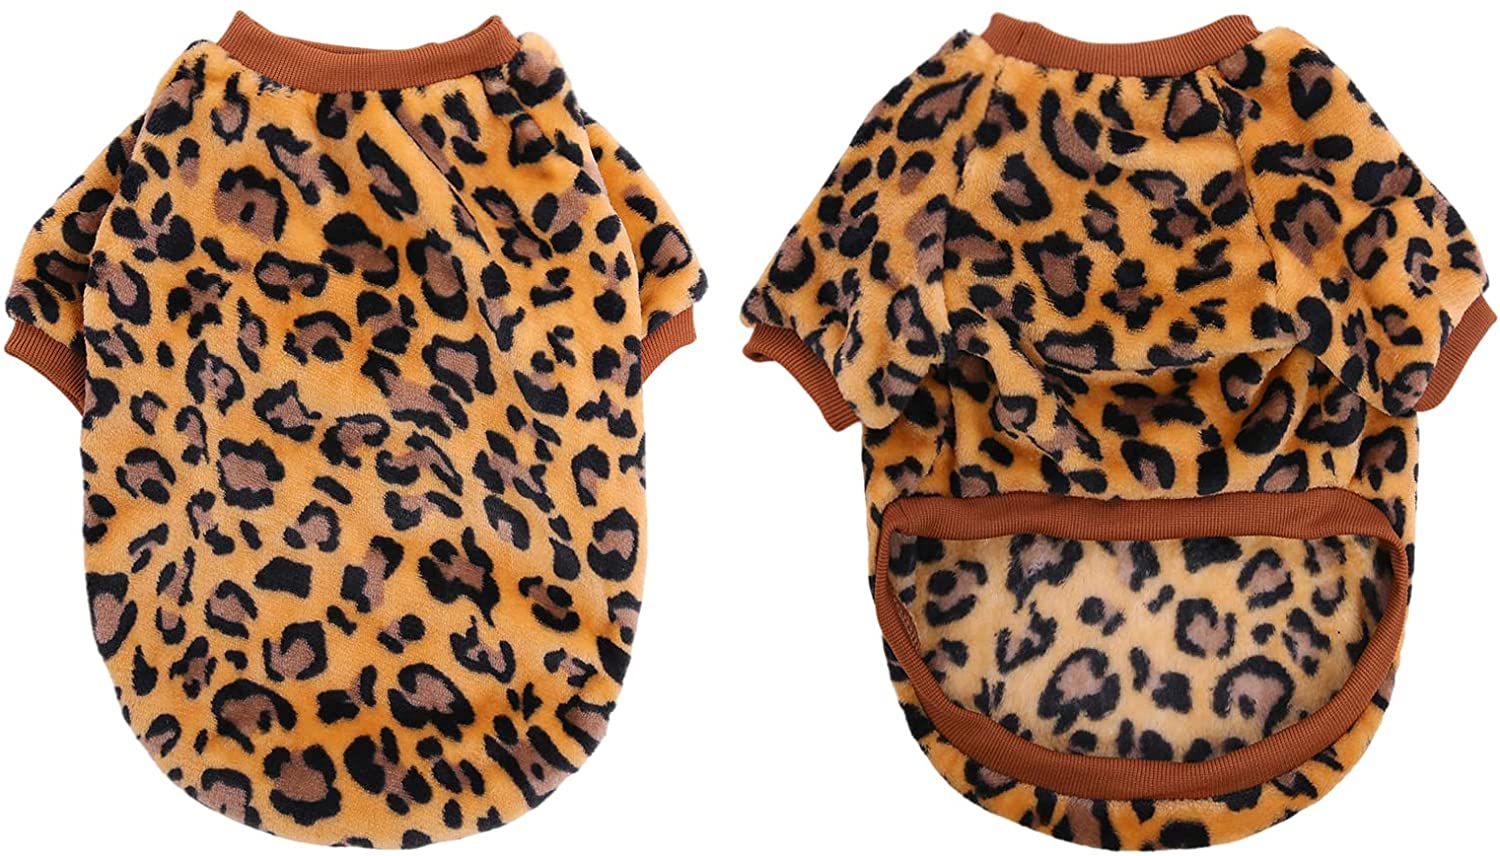 KUTKUT Fleece Dog Hoodie, Soft Flannel Dog Sweatshirt Clothes for Puppy Small Dogs, Cute Leopard Winter Party Dress Up Clothes for Puppy French Bulldog, Shih Tzu etc - kutkutstyle